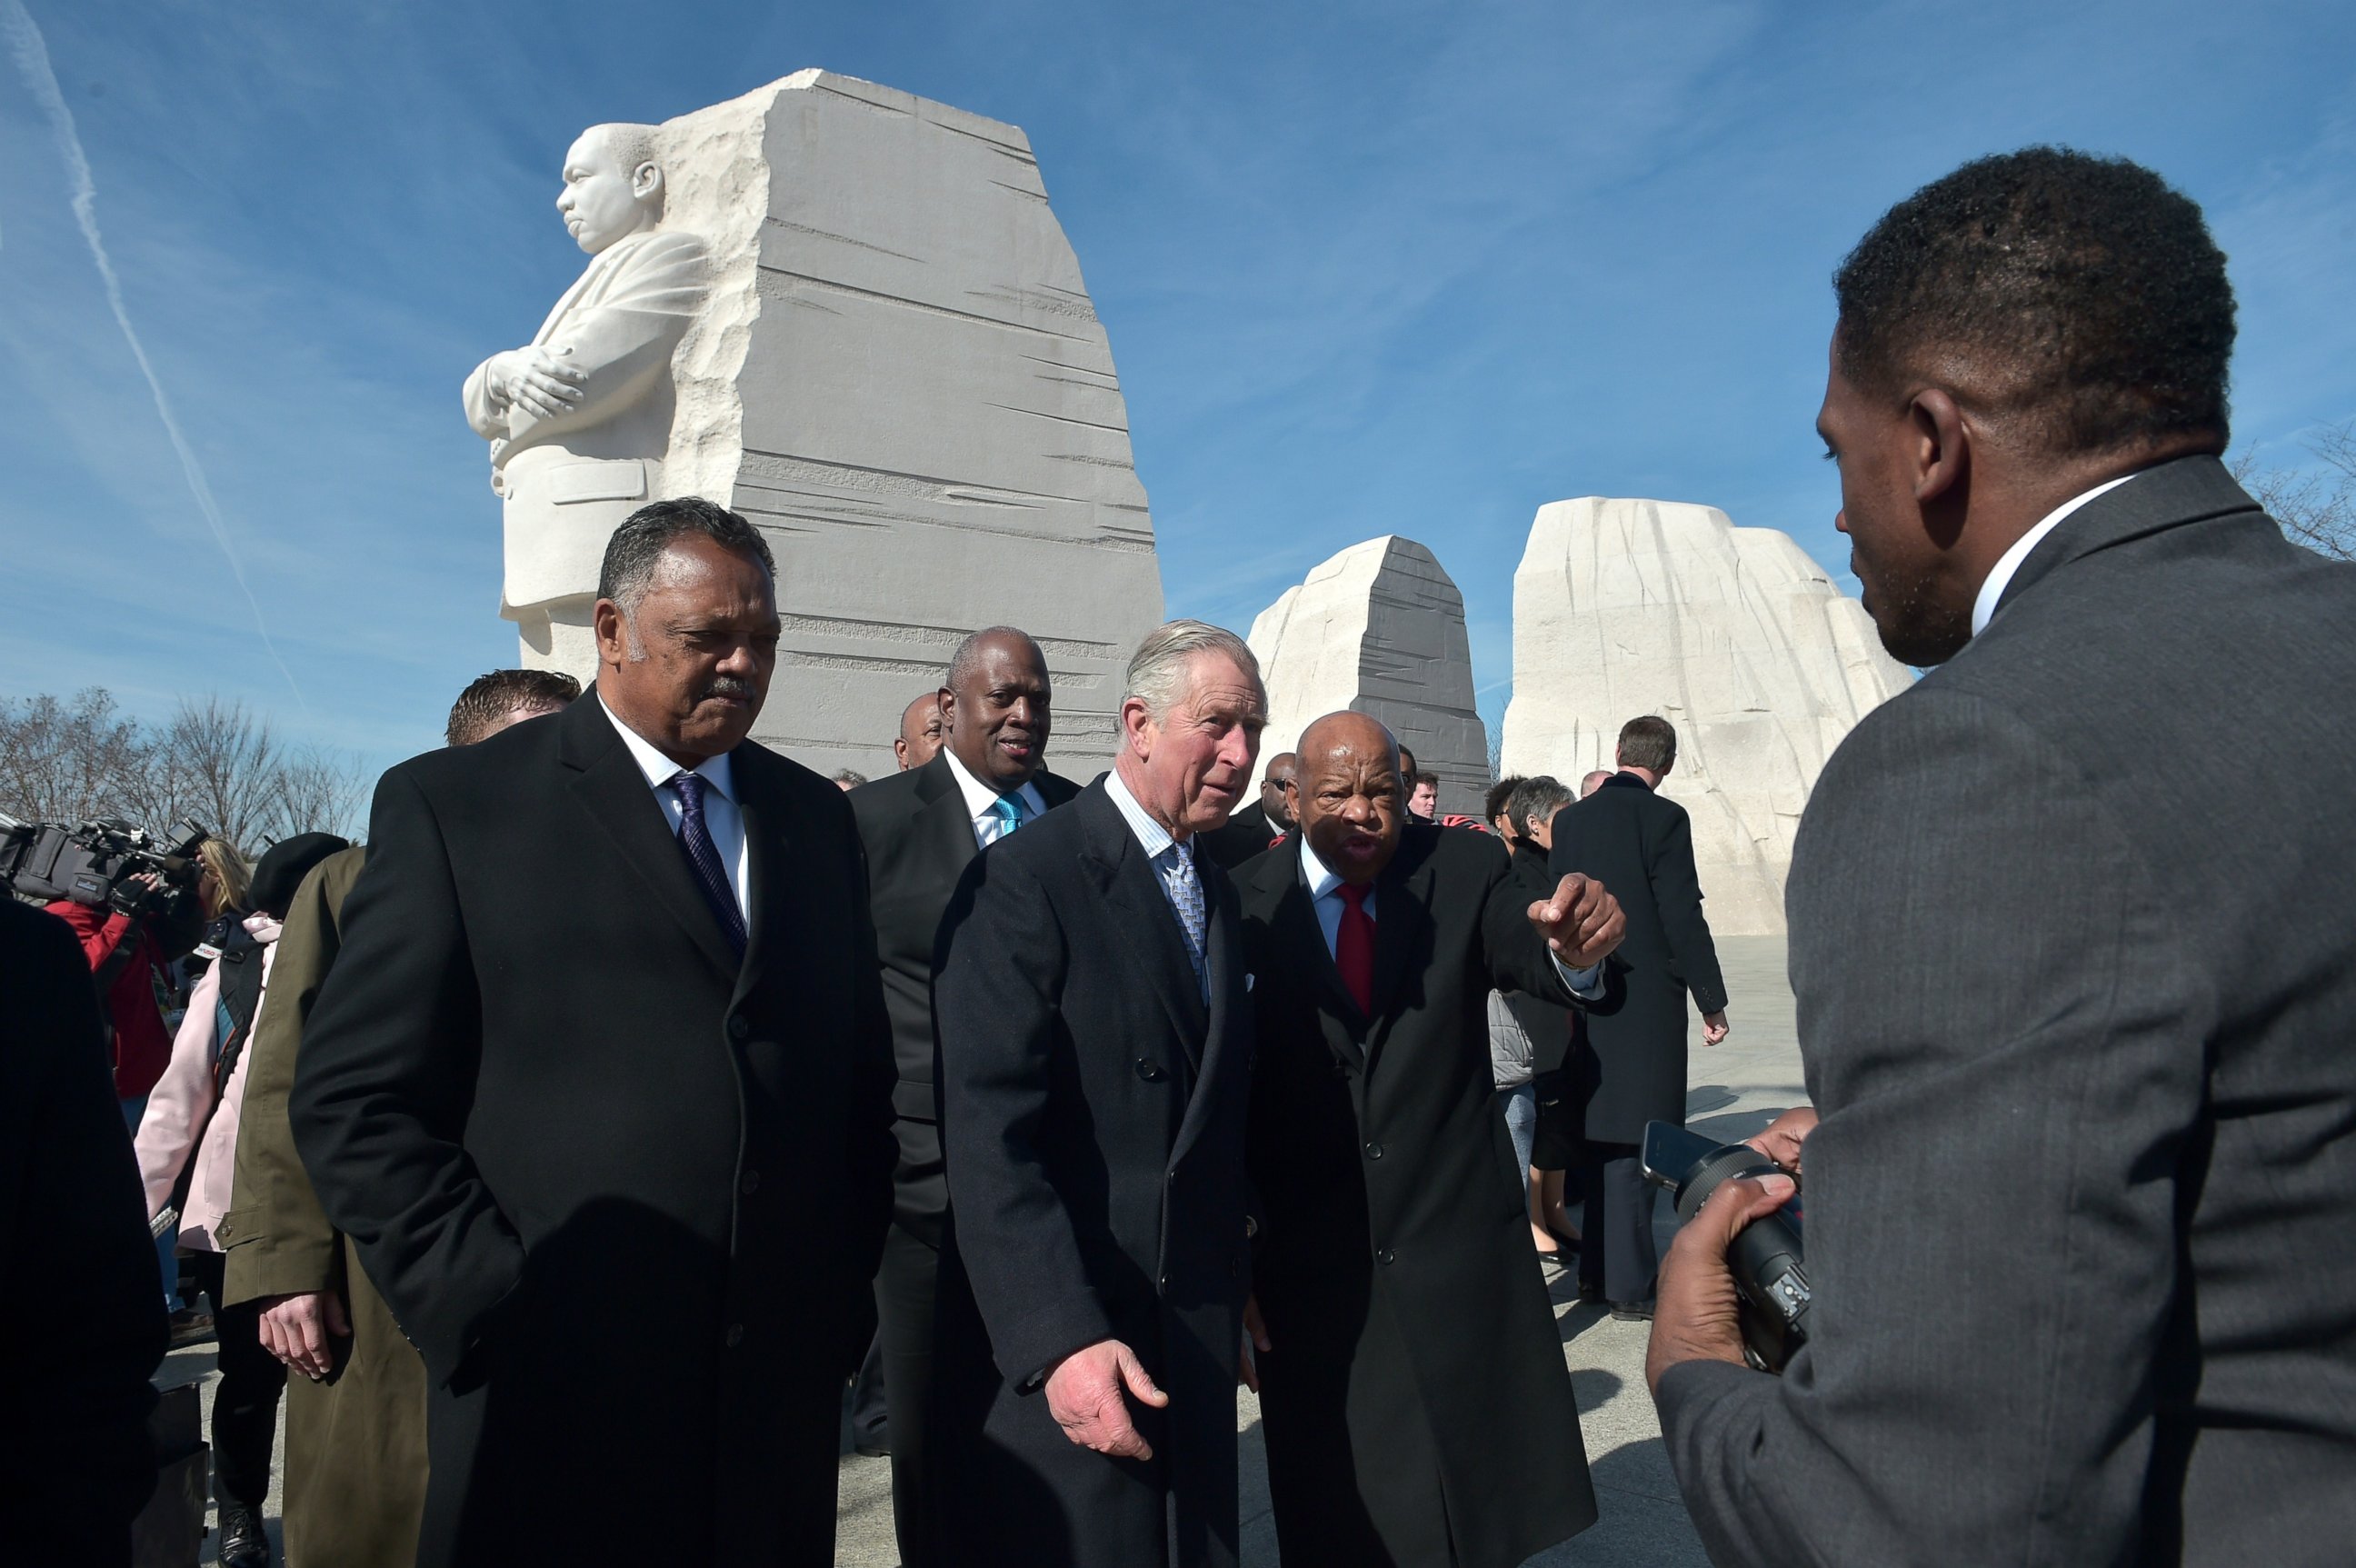 PHOTO: Britain's Prince Charles and Reverend Jesse Jackson visit the Martin Luther King Memorial, March 18, 2015, in Washington, DC.